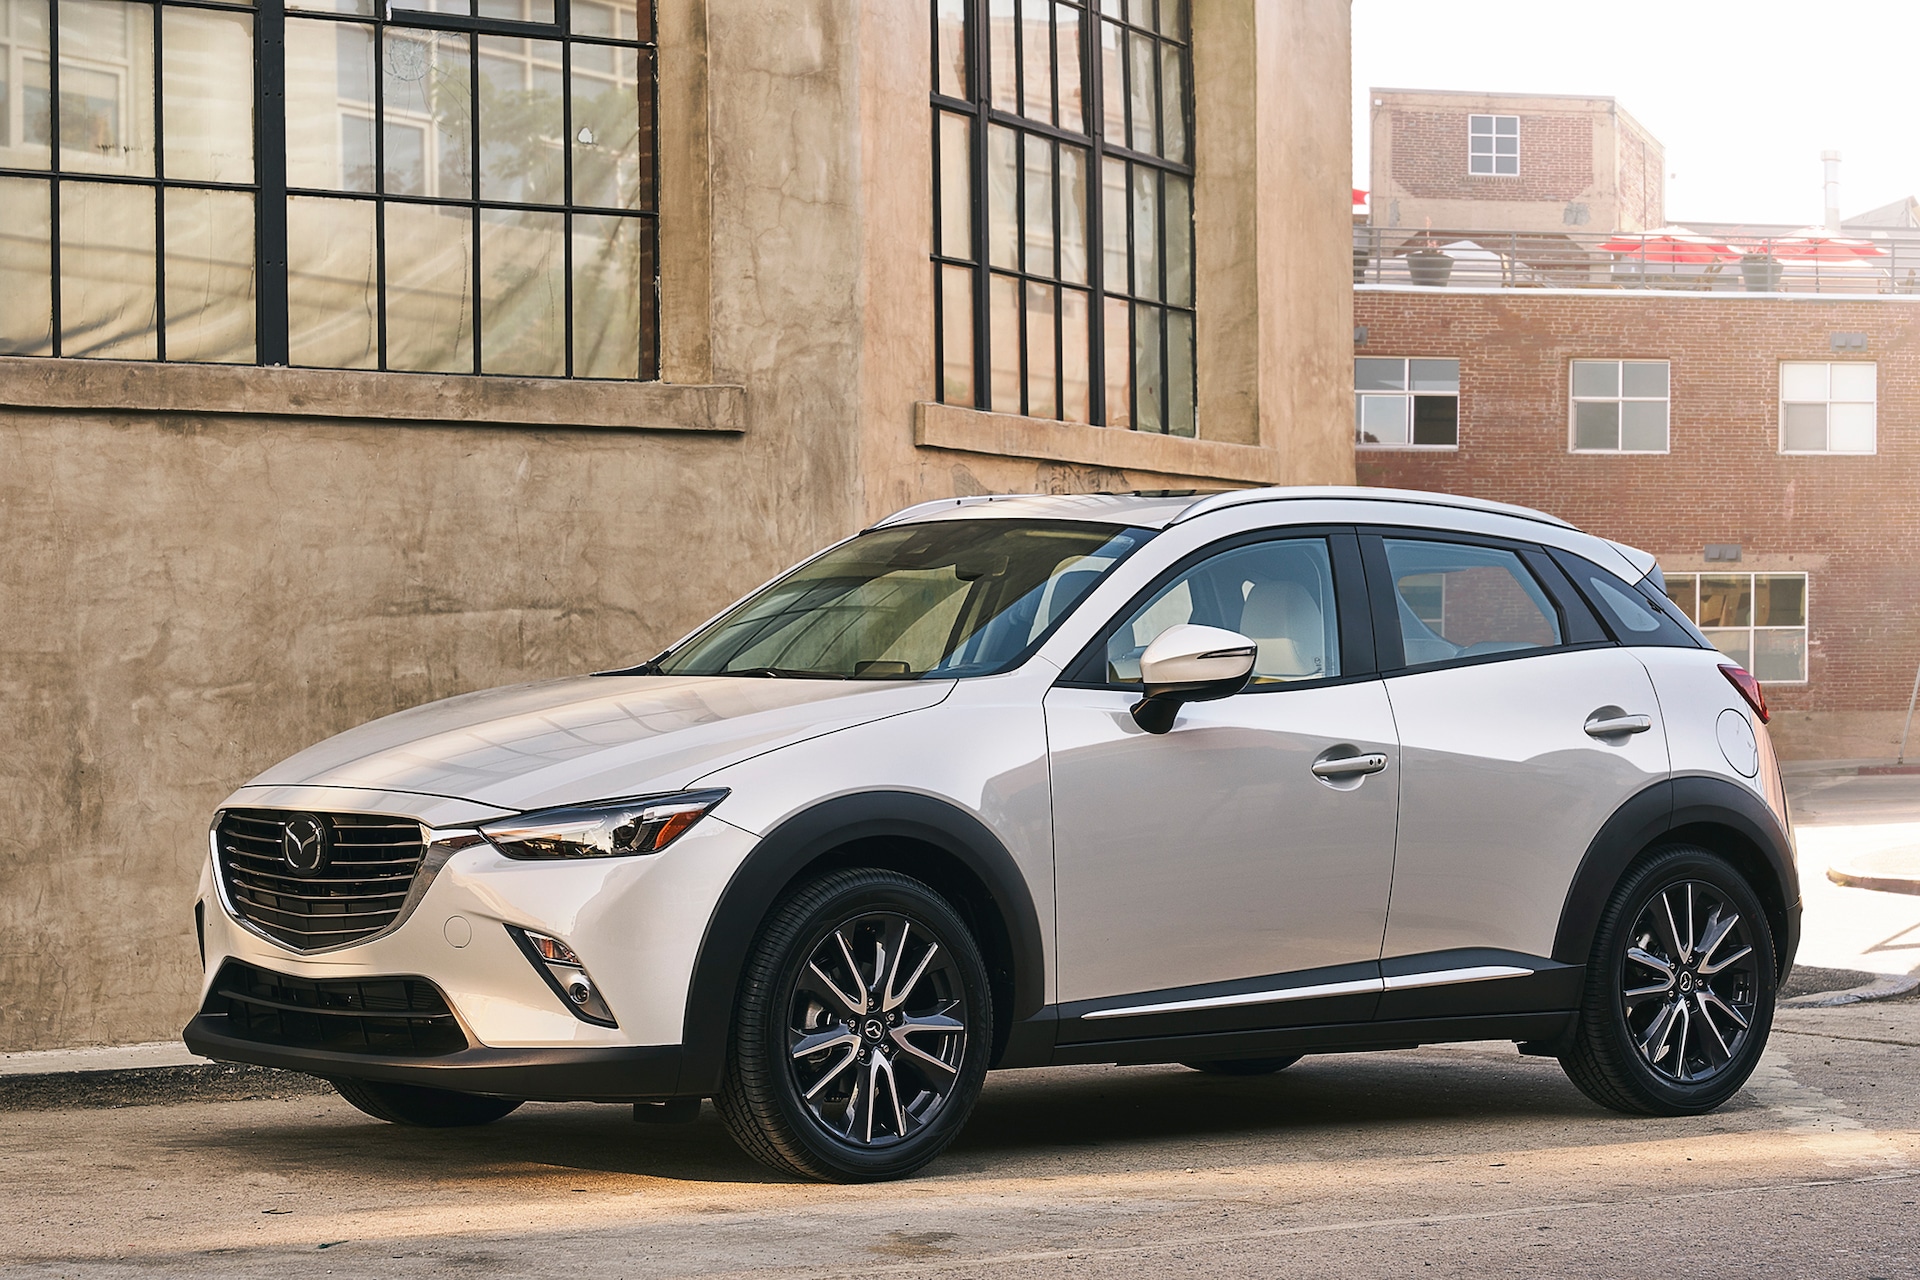 2018 Mazda CX-3 Gains New Tech, Chassis Updates